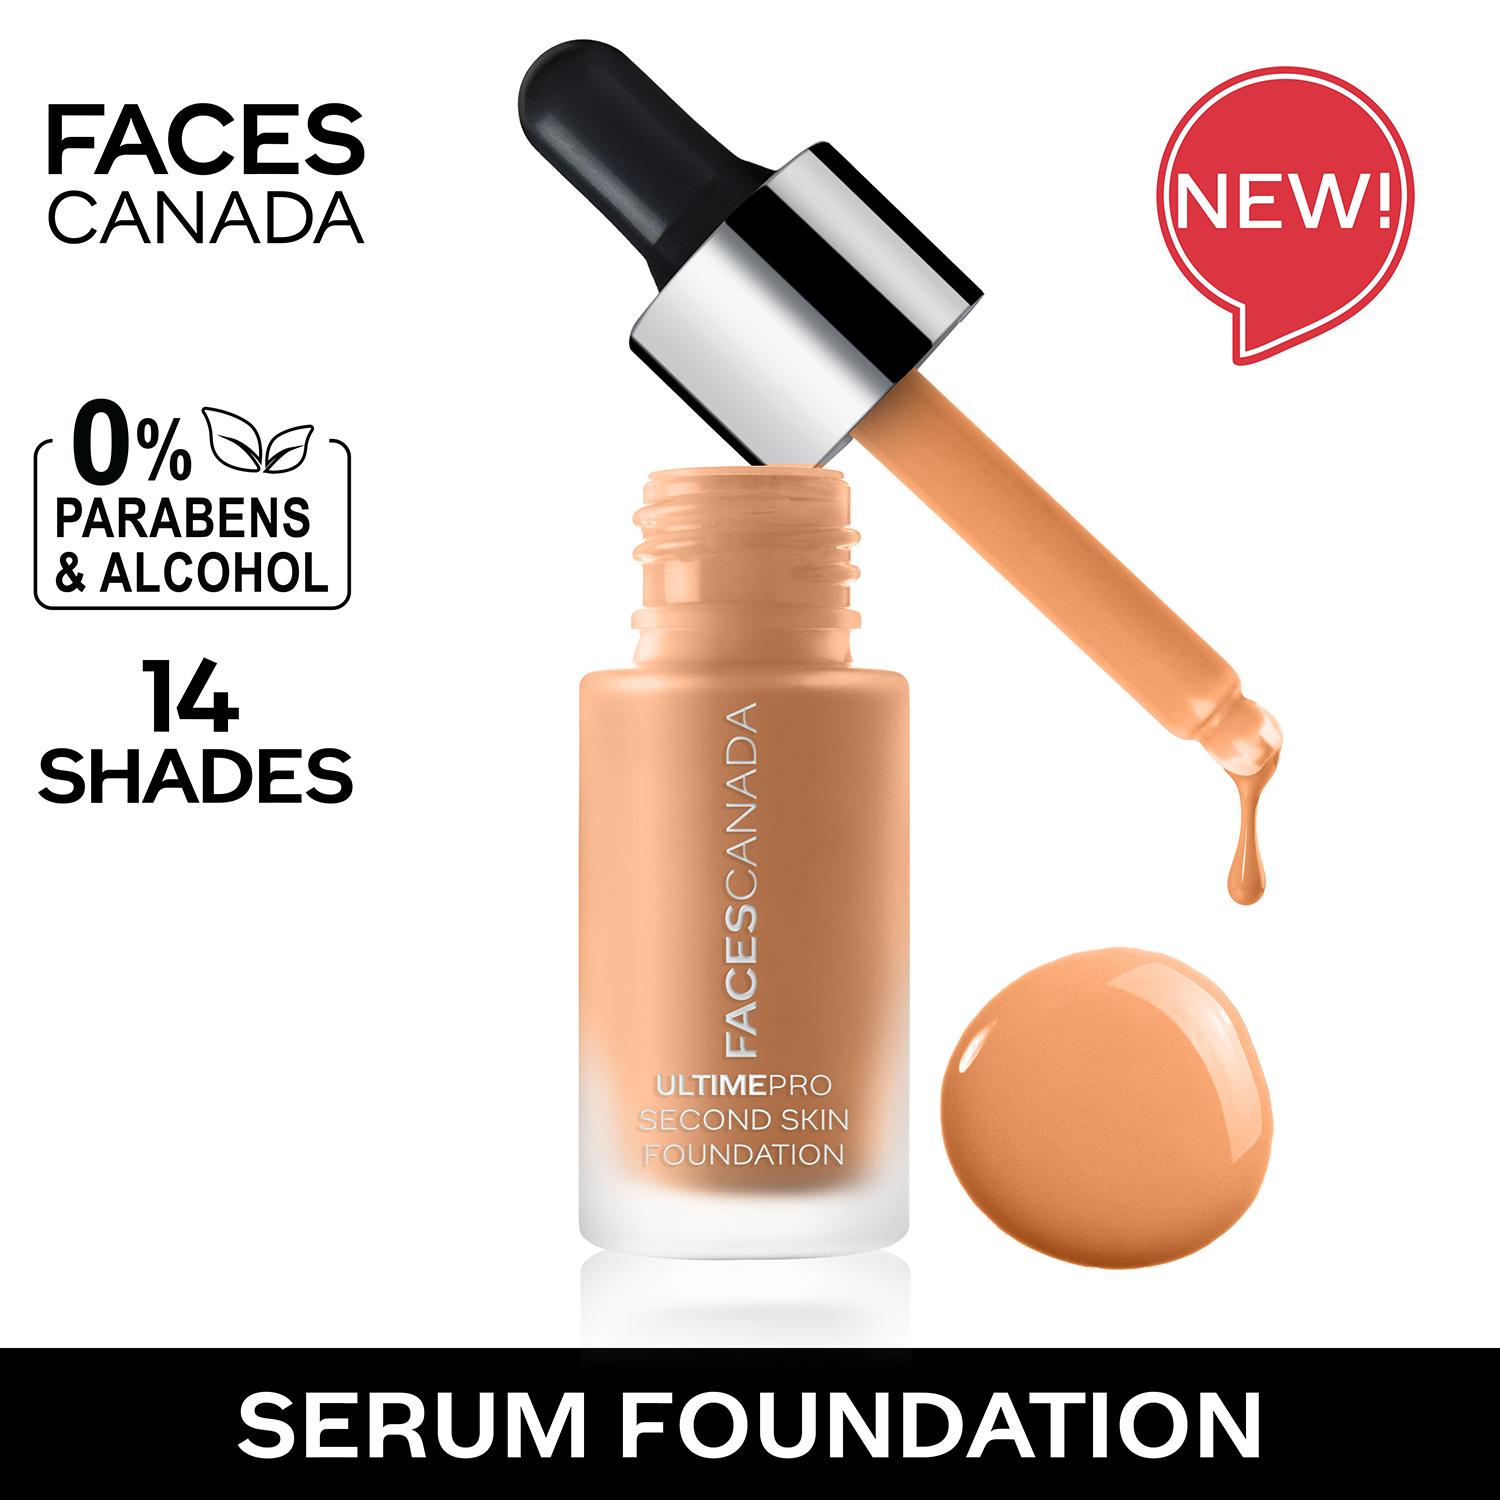 Faces Canada | Faces Canada Ultime Pro Second Skin Foundation - Soft Sand 041, Matte Finish, SPF 15 (15 ml)